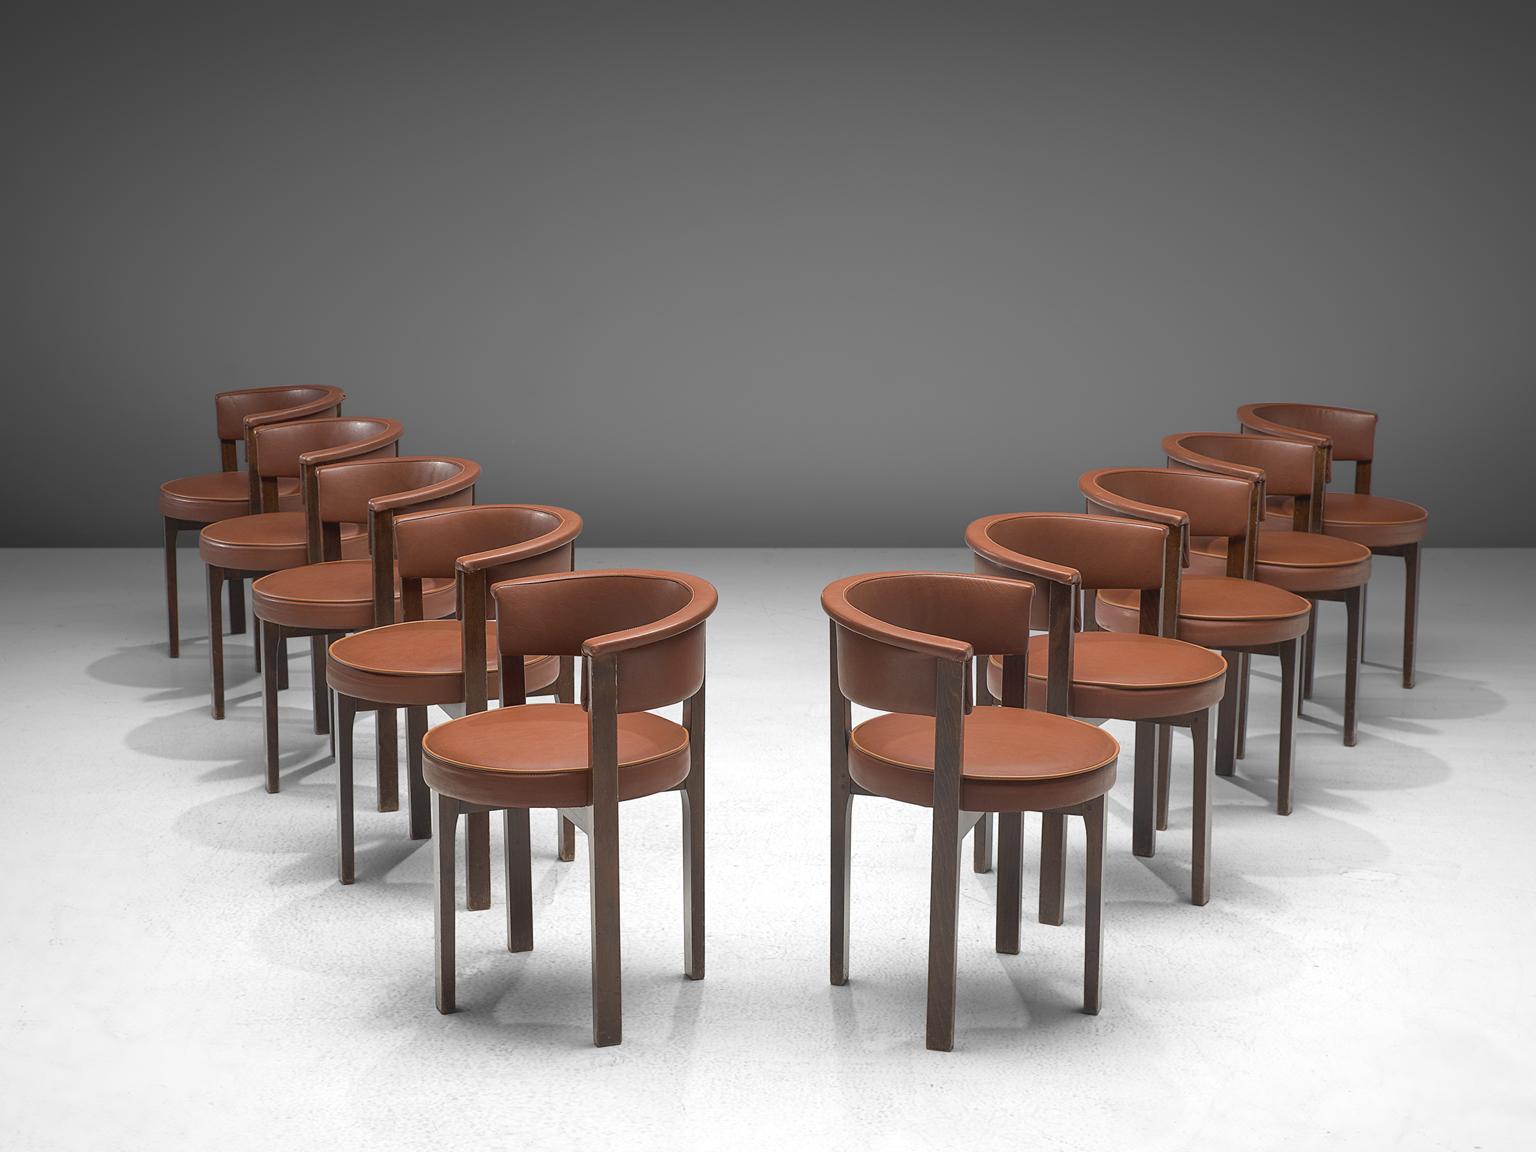 Set of 10 chairs, faux cognac leather, darkened beech, The Netherlands, 1960s.

This set of ten armchairs is executed in darkened wood and a red-brown leatherette upholstery. This is a comfortable design with simplistic, strong lines and balanced